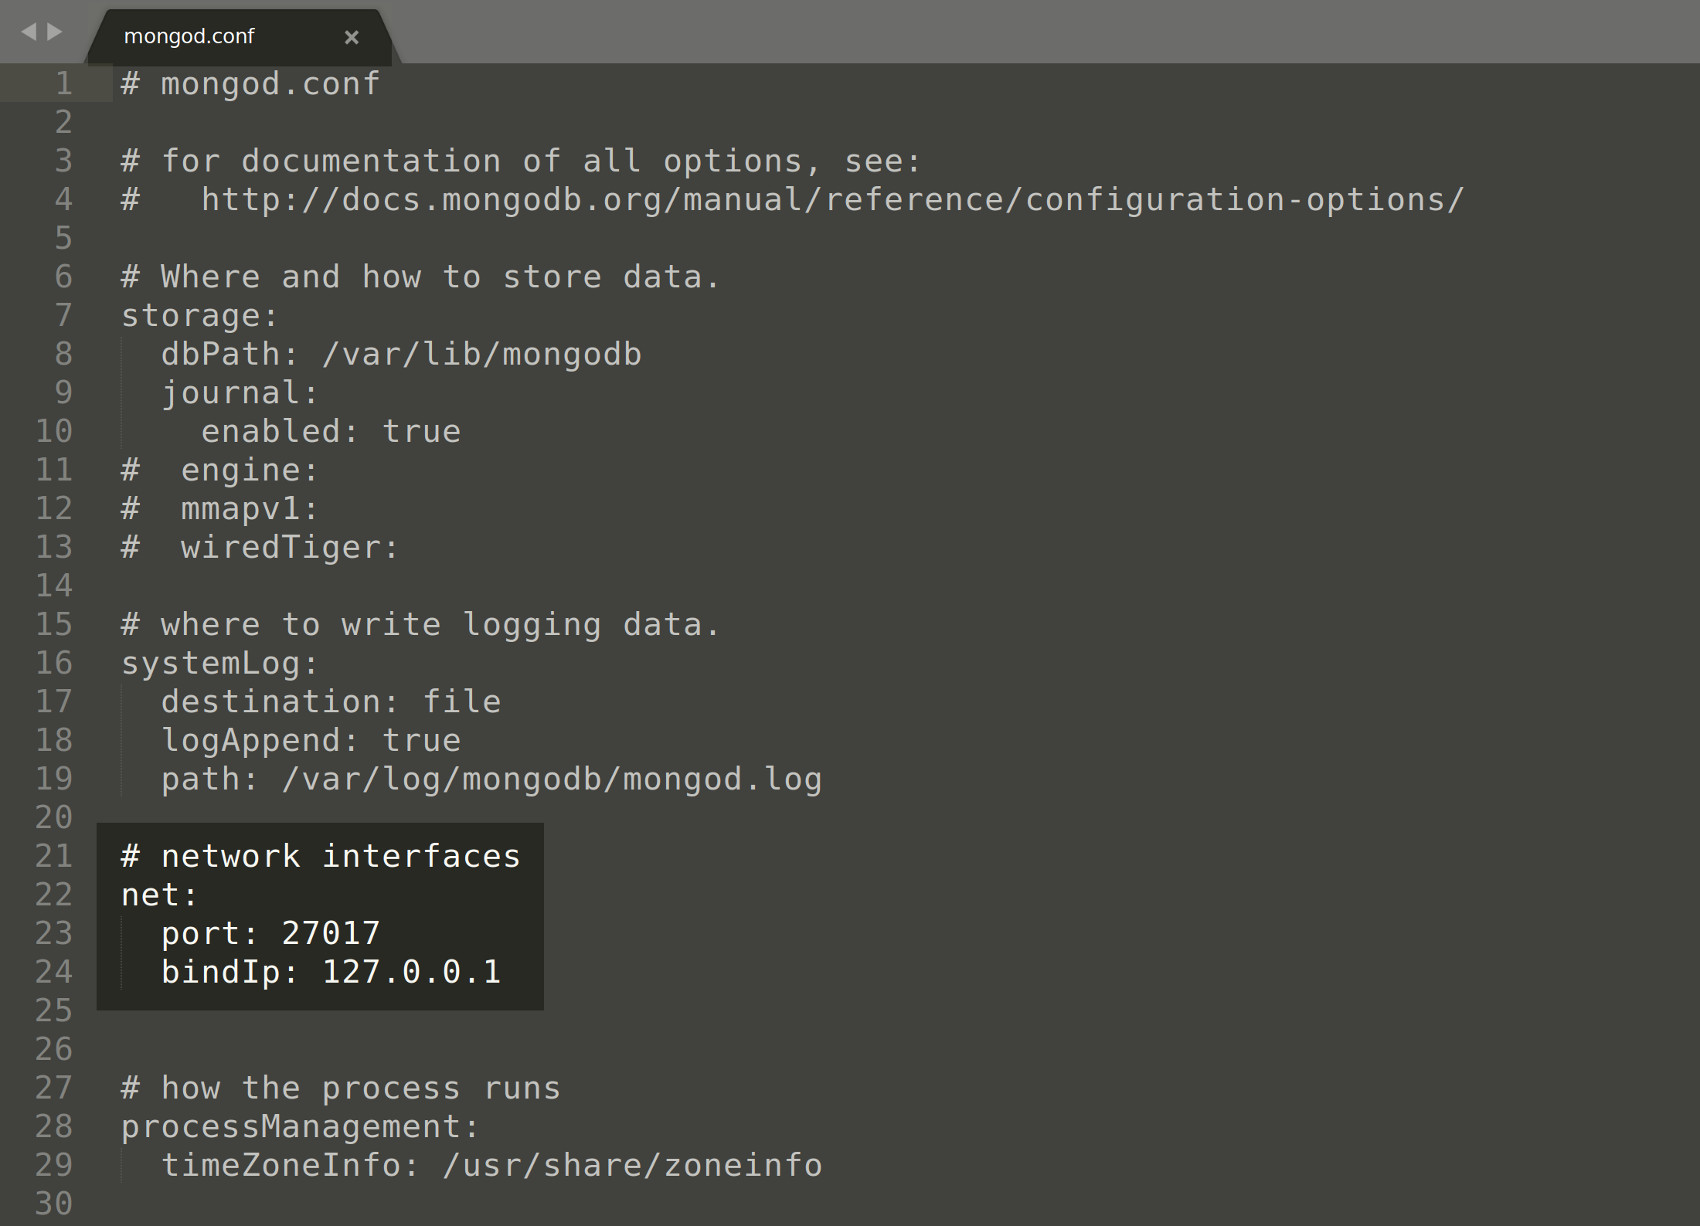 Screenshot of the mongod.conf configuration file in text editor